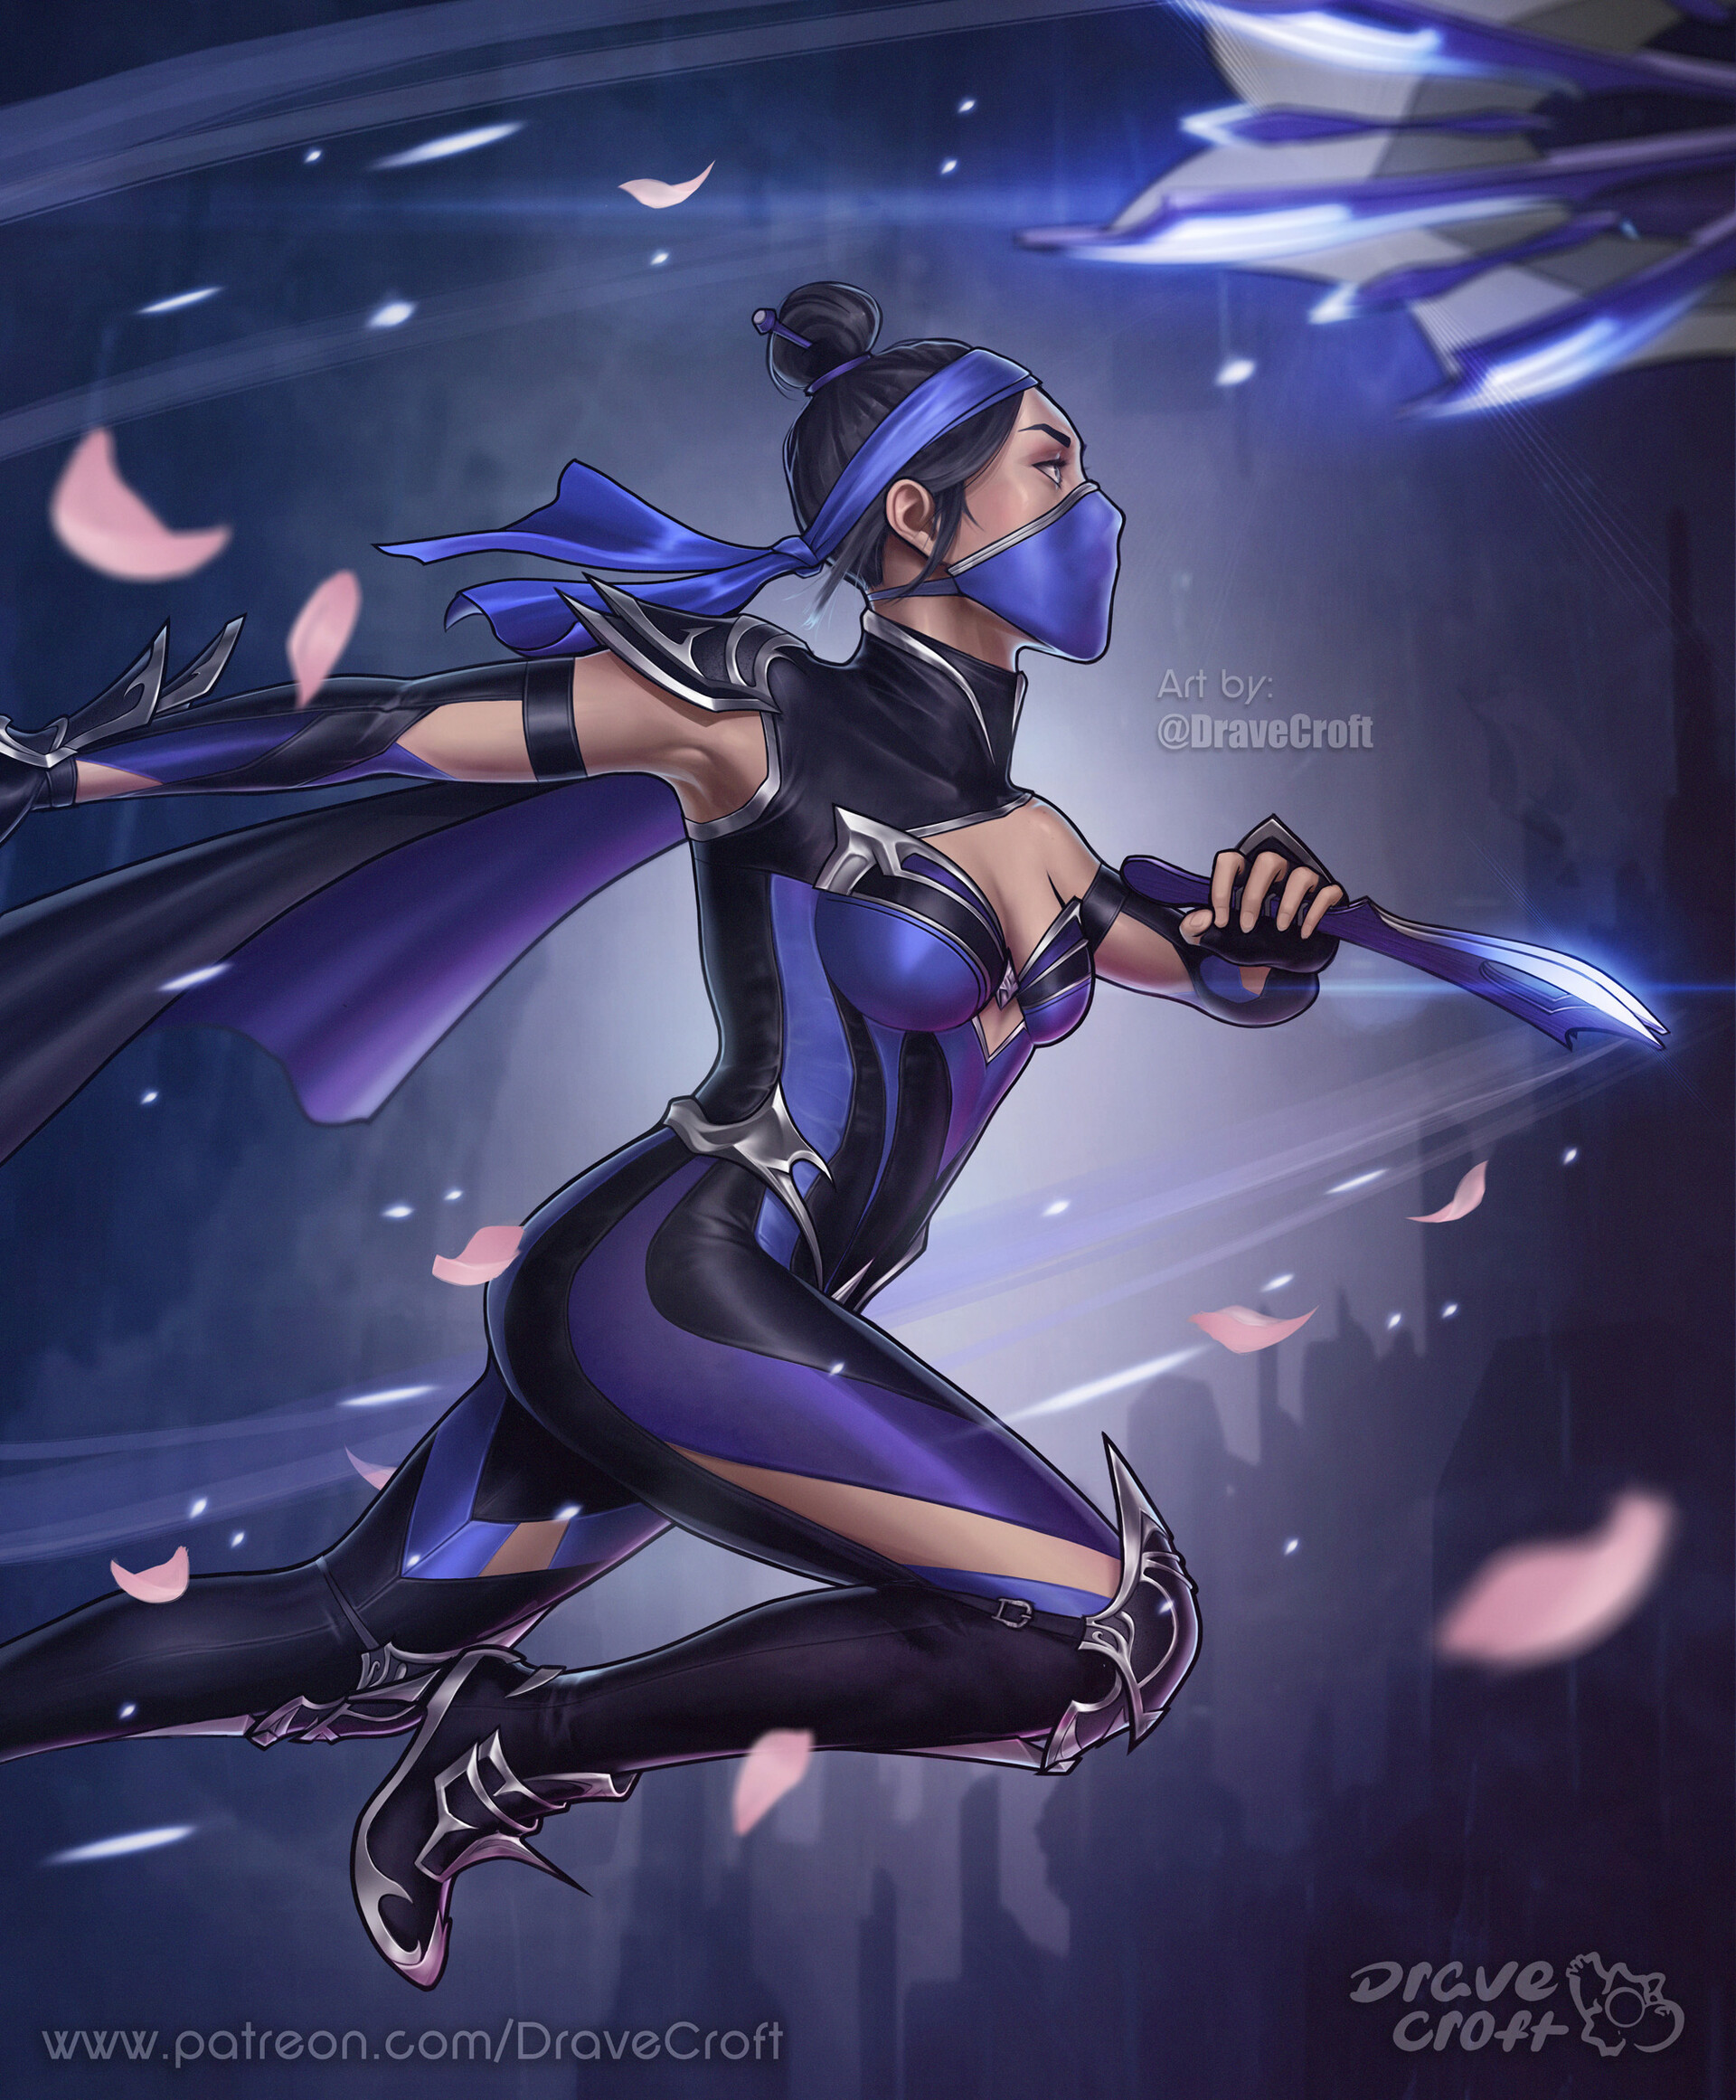 Best of Pictures of kitana from mortal kombat